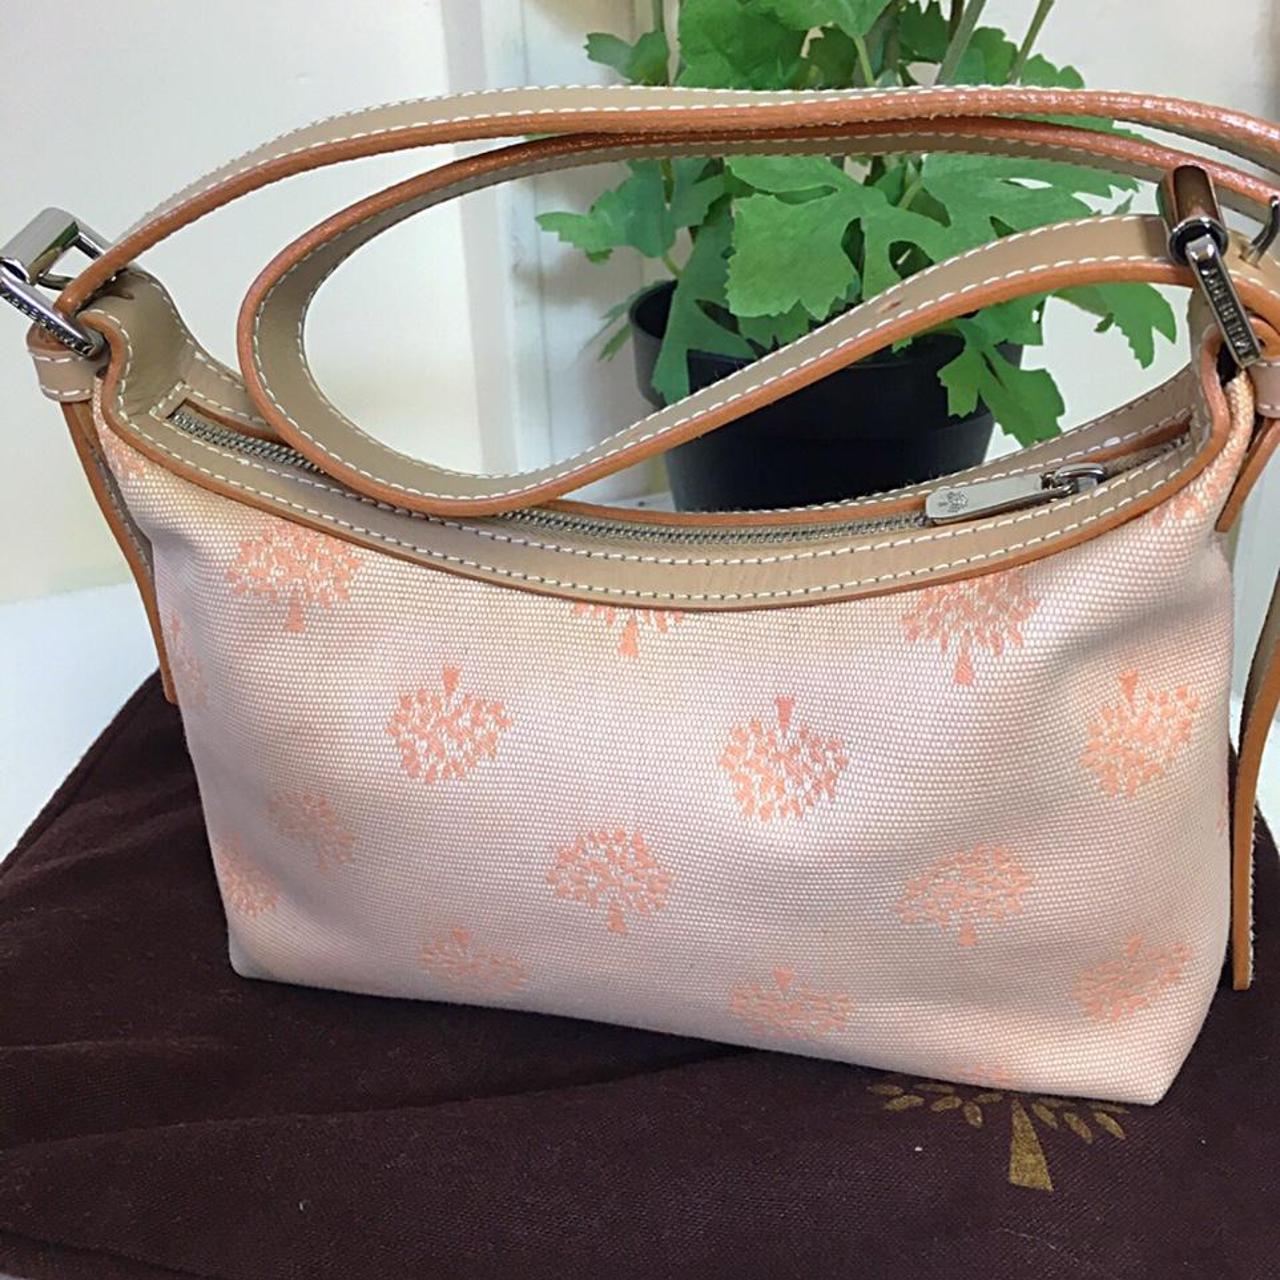 Mulberry Women's Tan and Cream Bag (3)